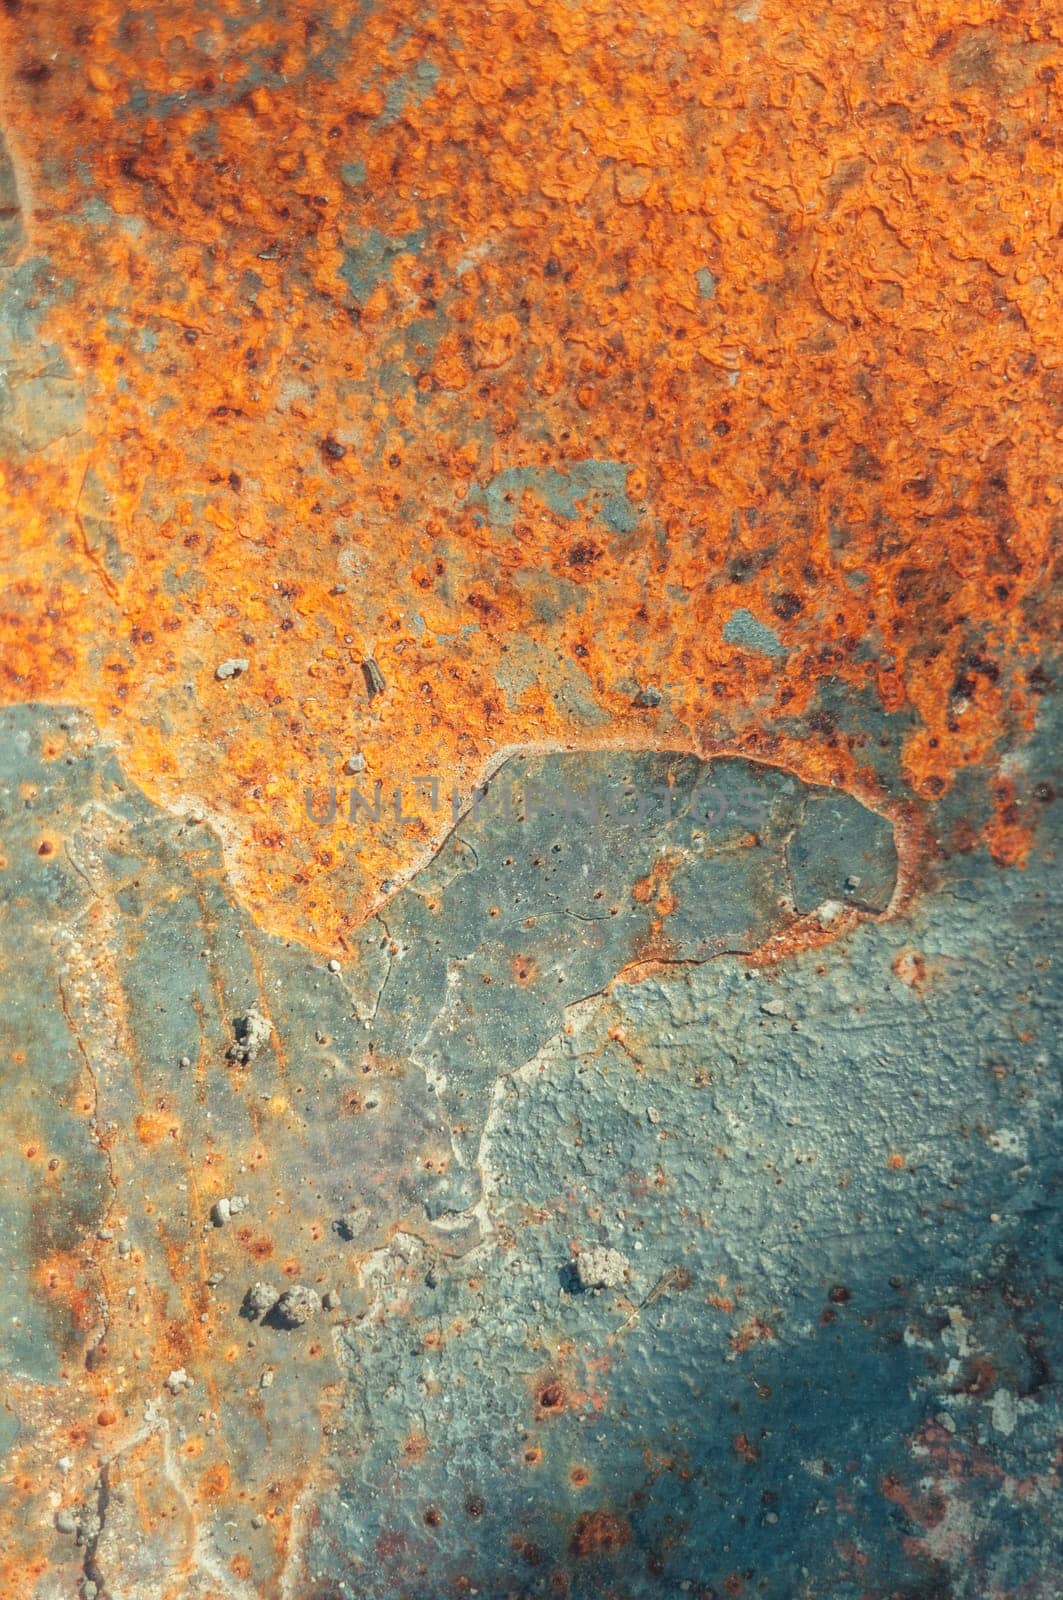 The image is of a rusty surface with a blue and orange color scheme. The surface appears to be old and worn, with a lot of rust and dirt. Scene is somewhat bleak and desolate